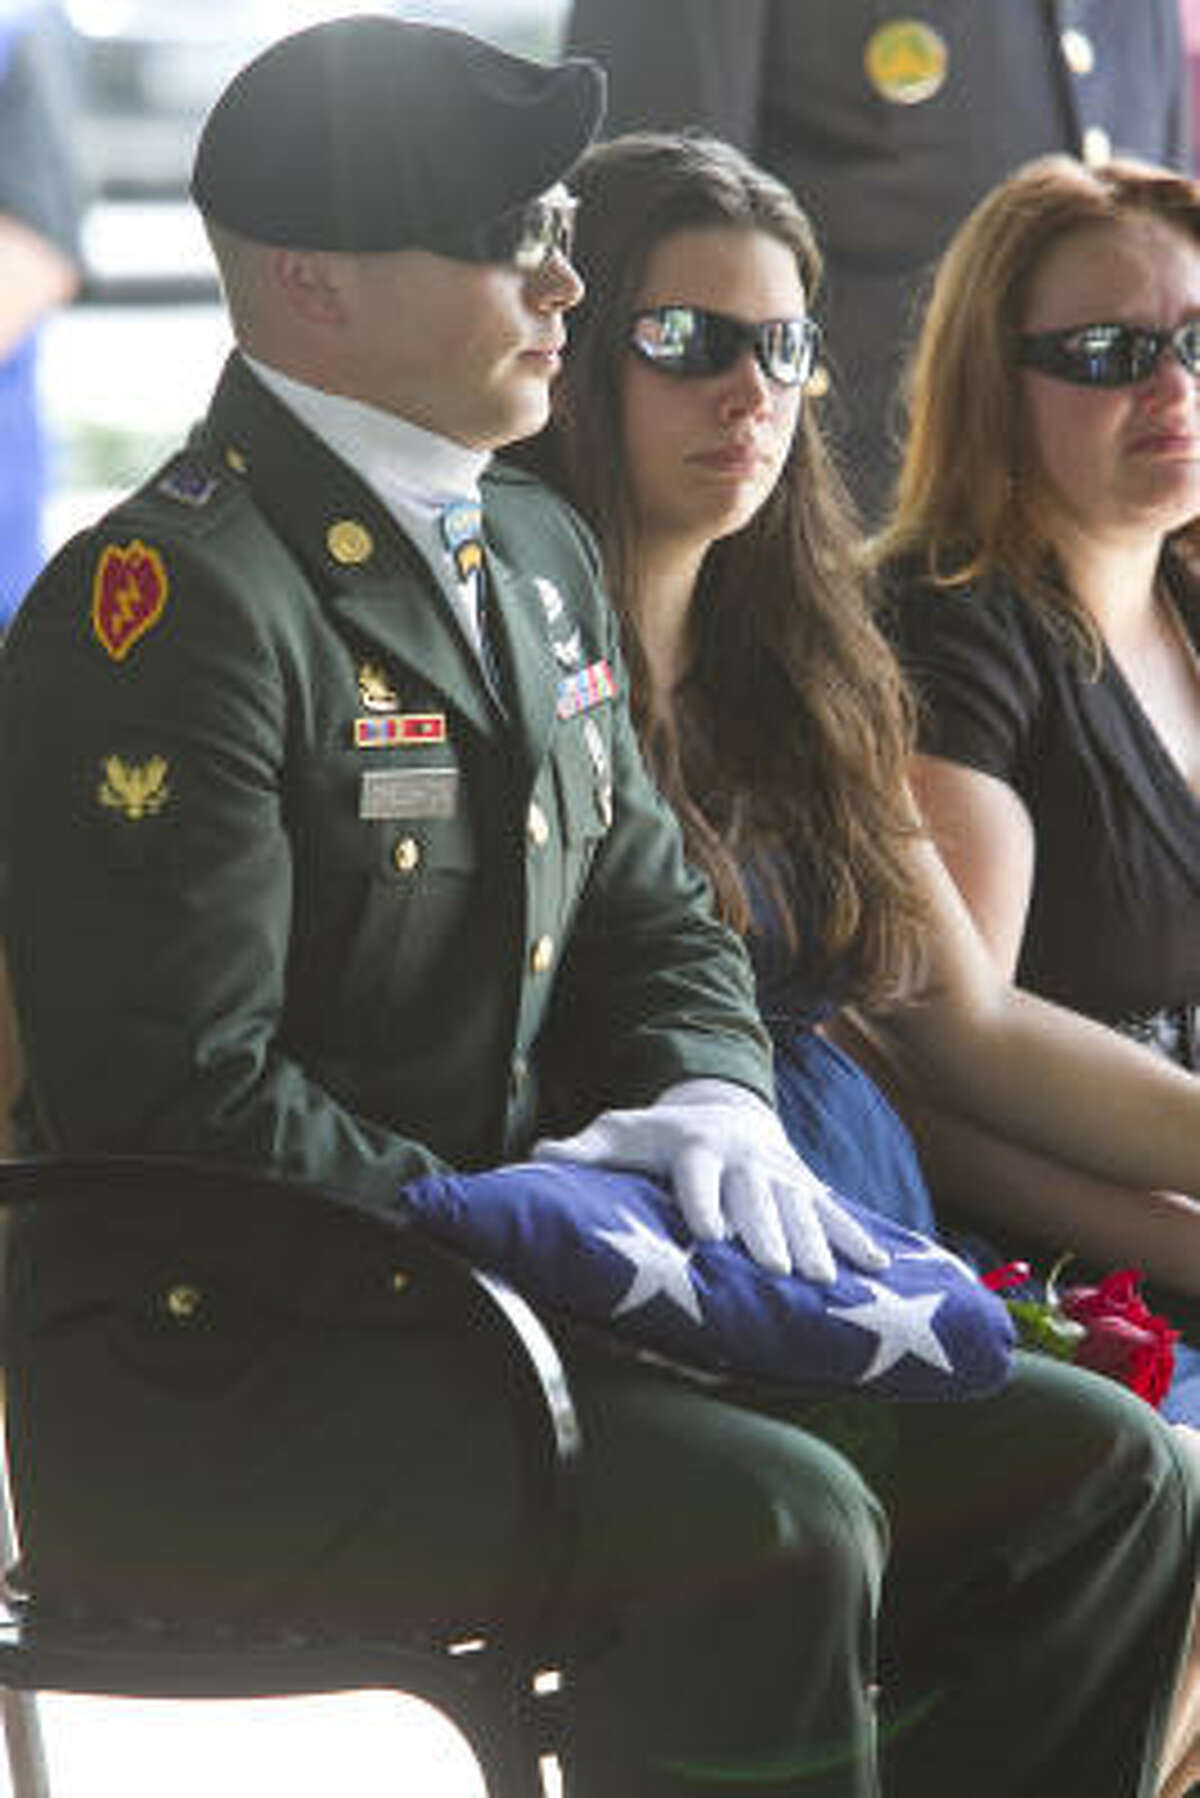 U.S. Army Spc. Allen Creighton is presented a flag for his brother Army Sgt. Andrew Creighton.